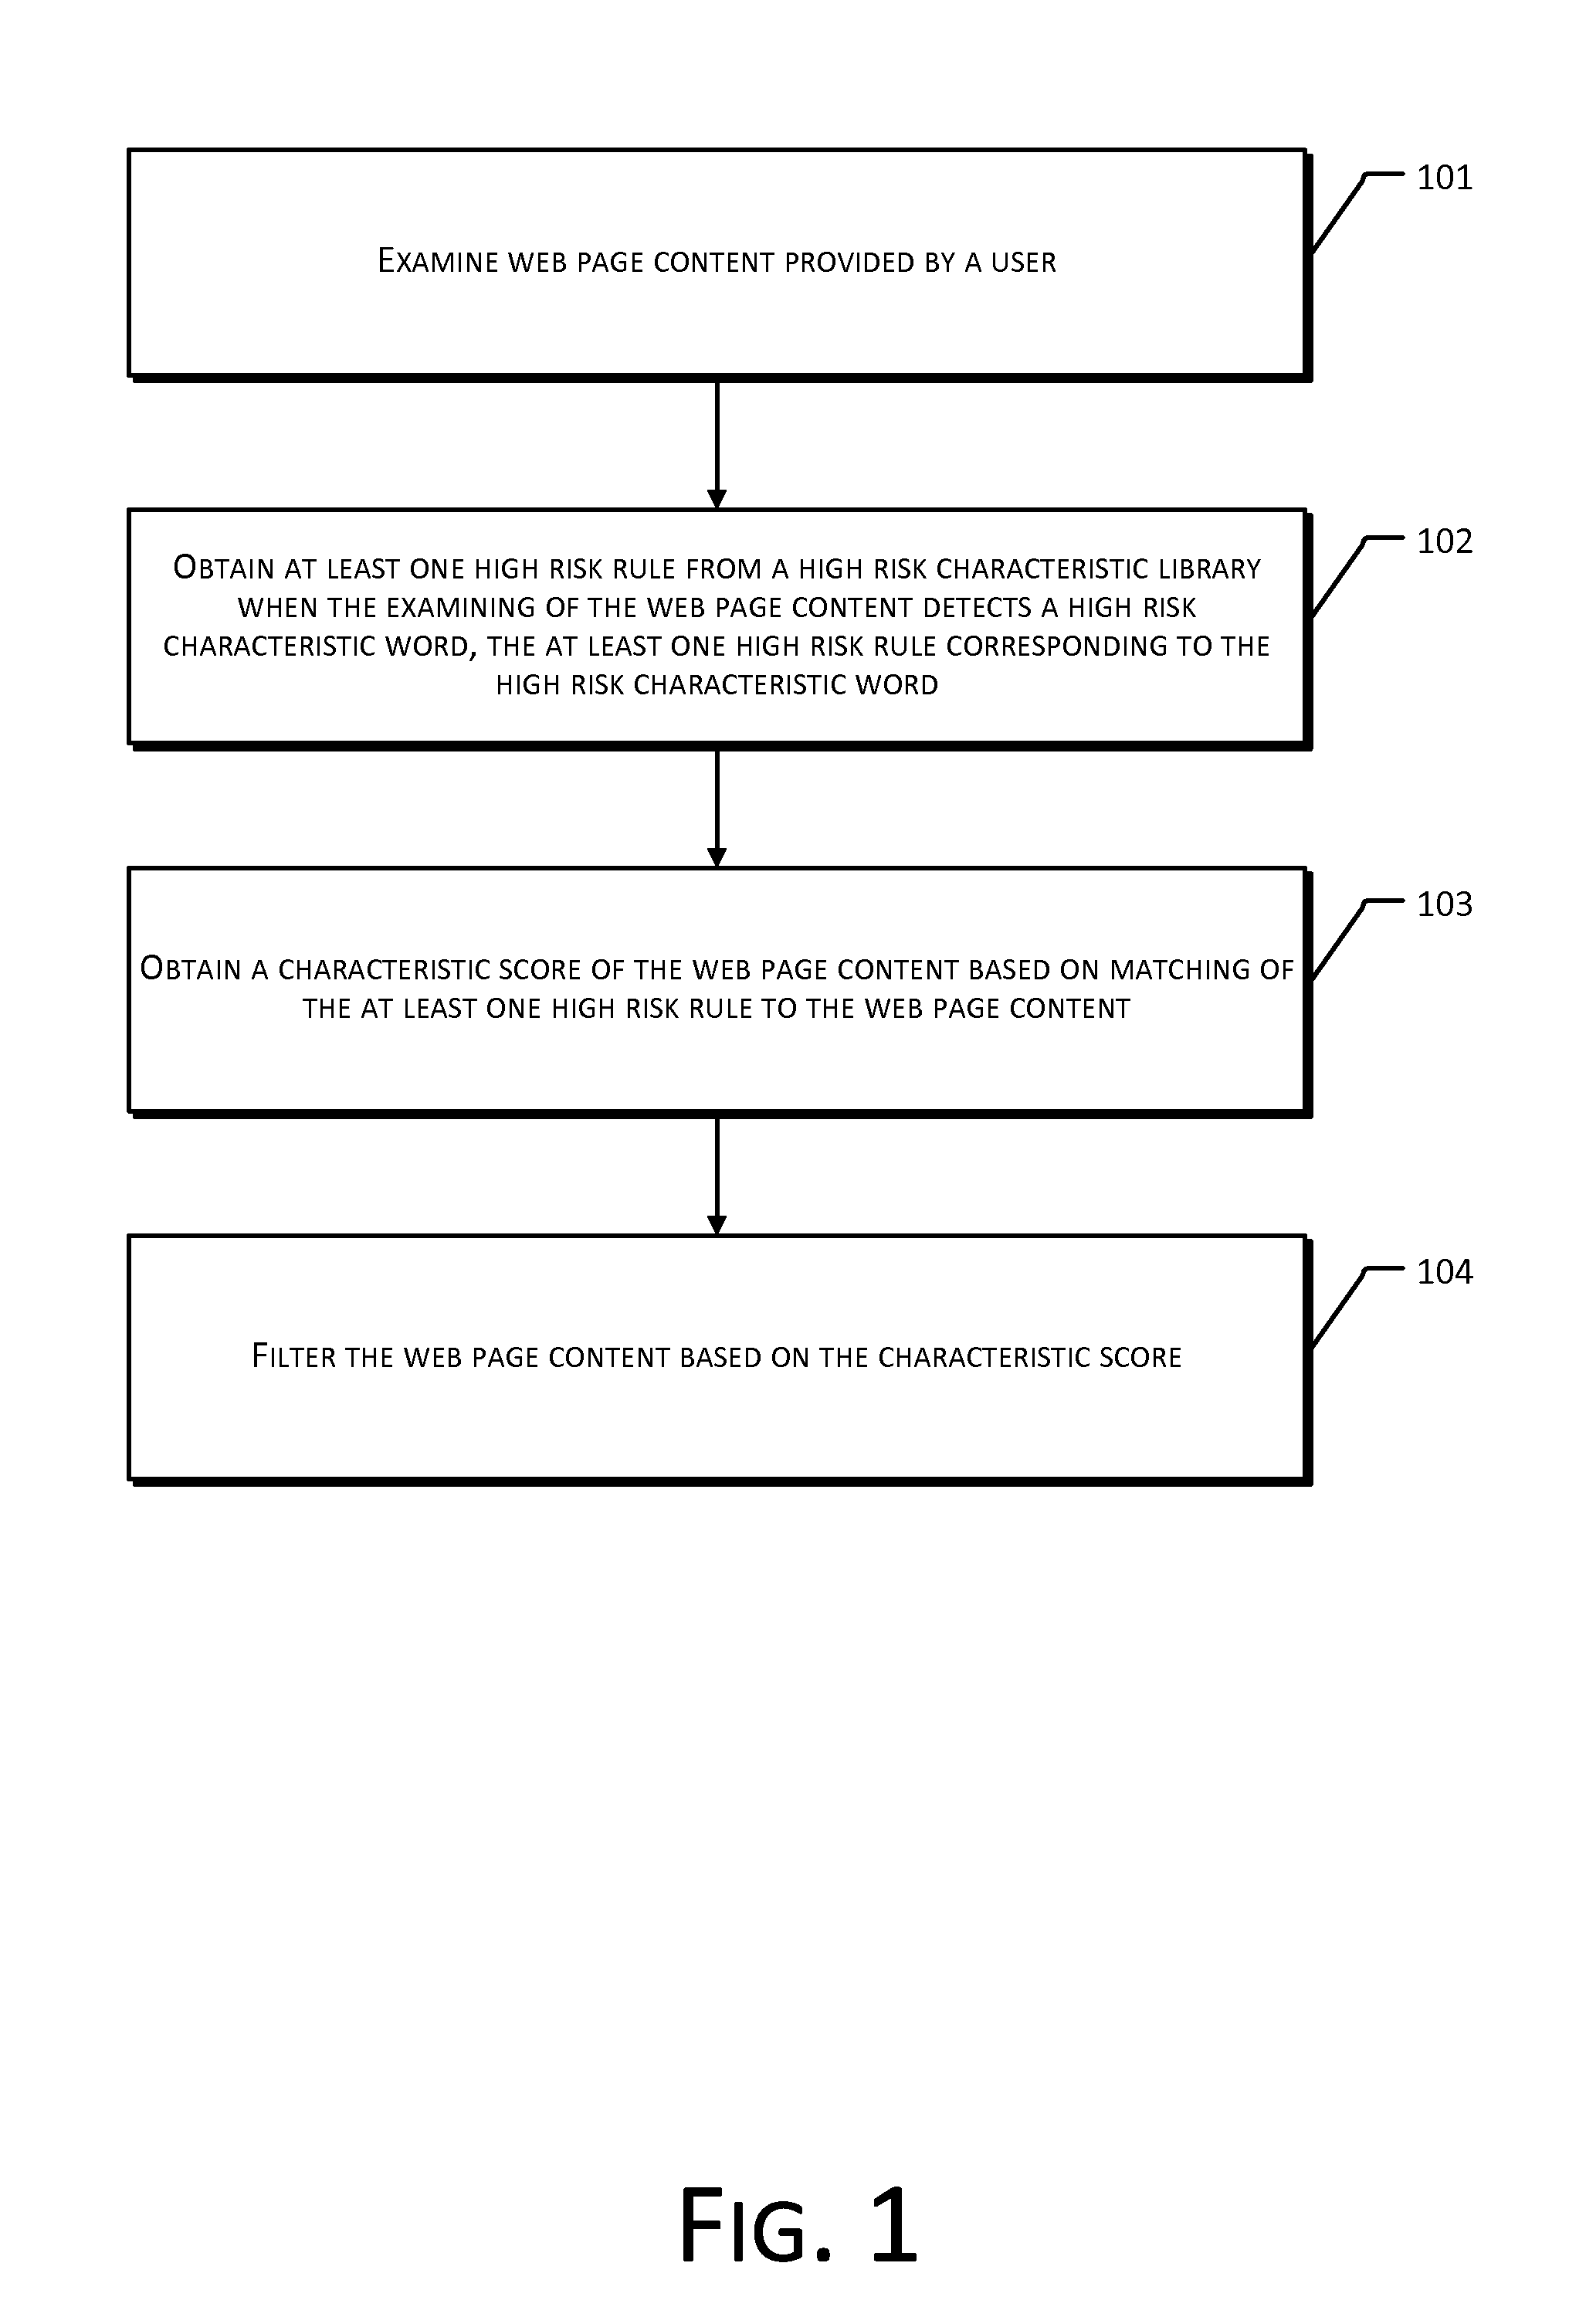 Method and System of Web Page Content Filtering